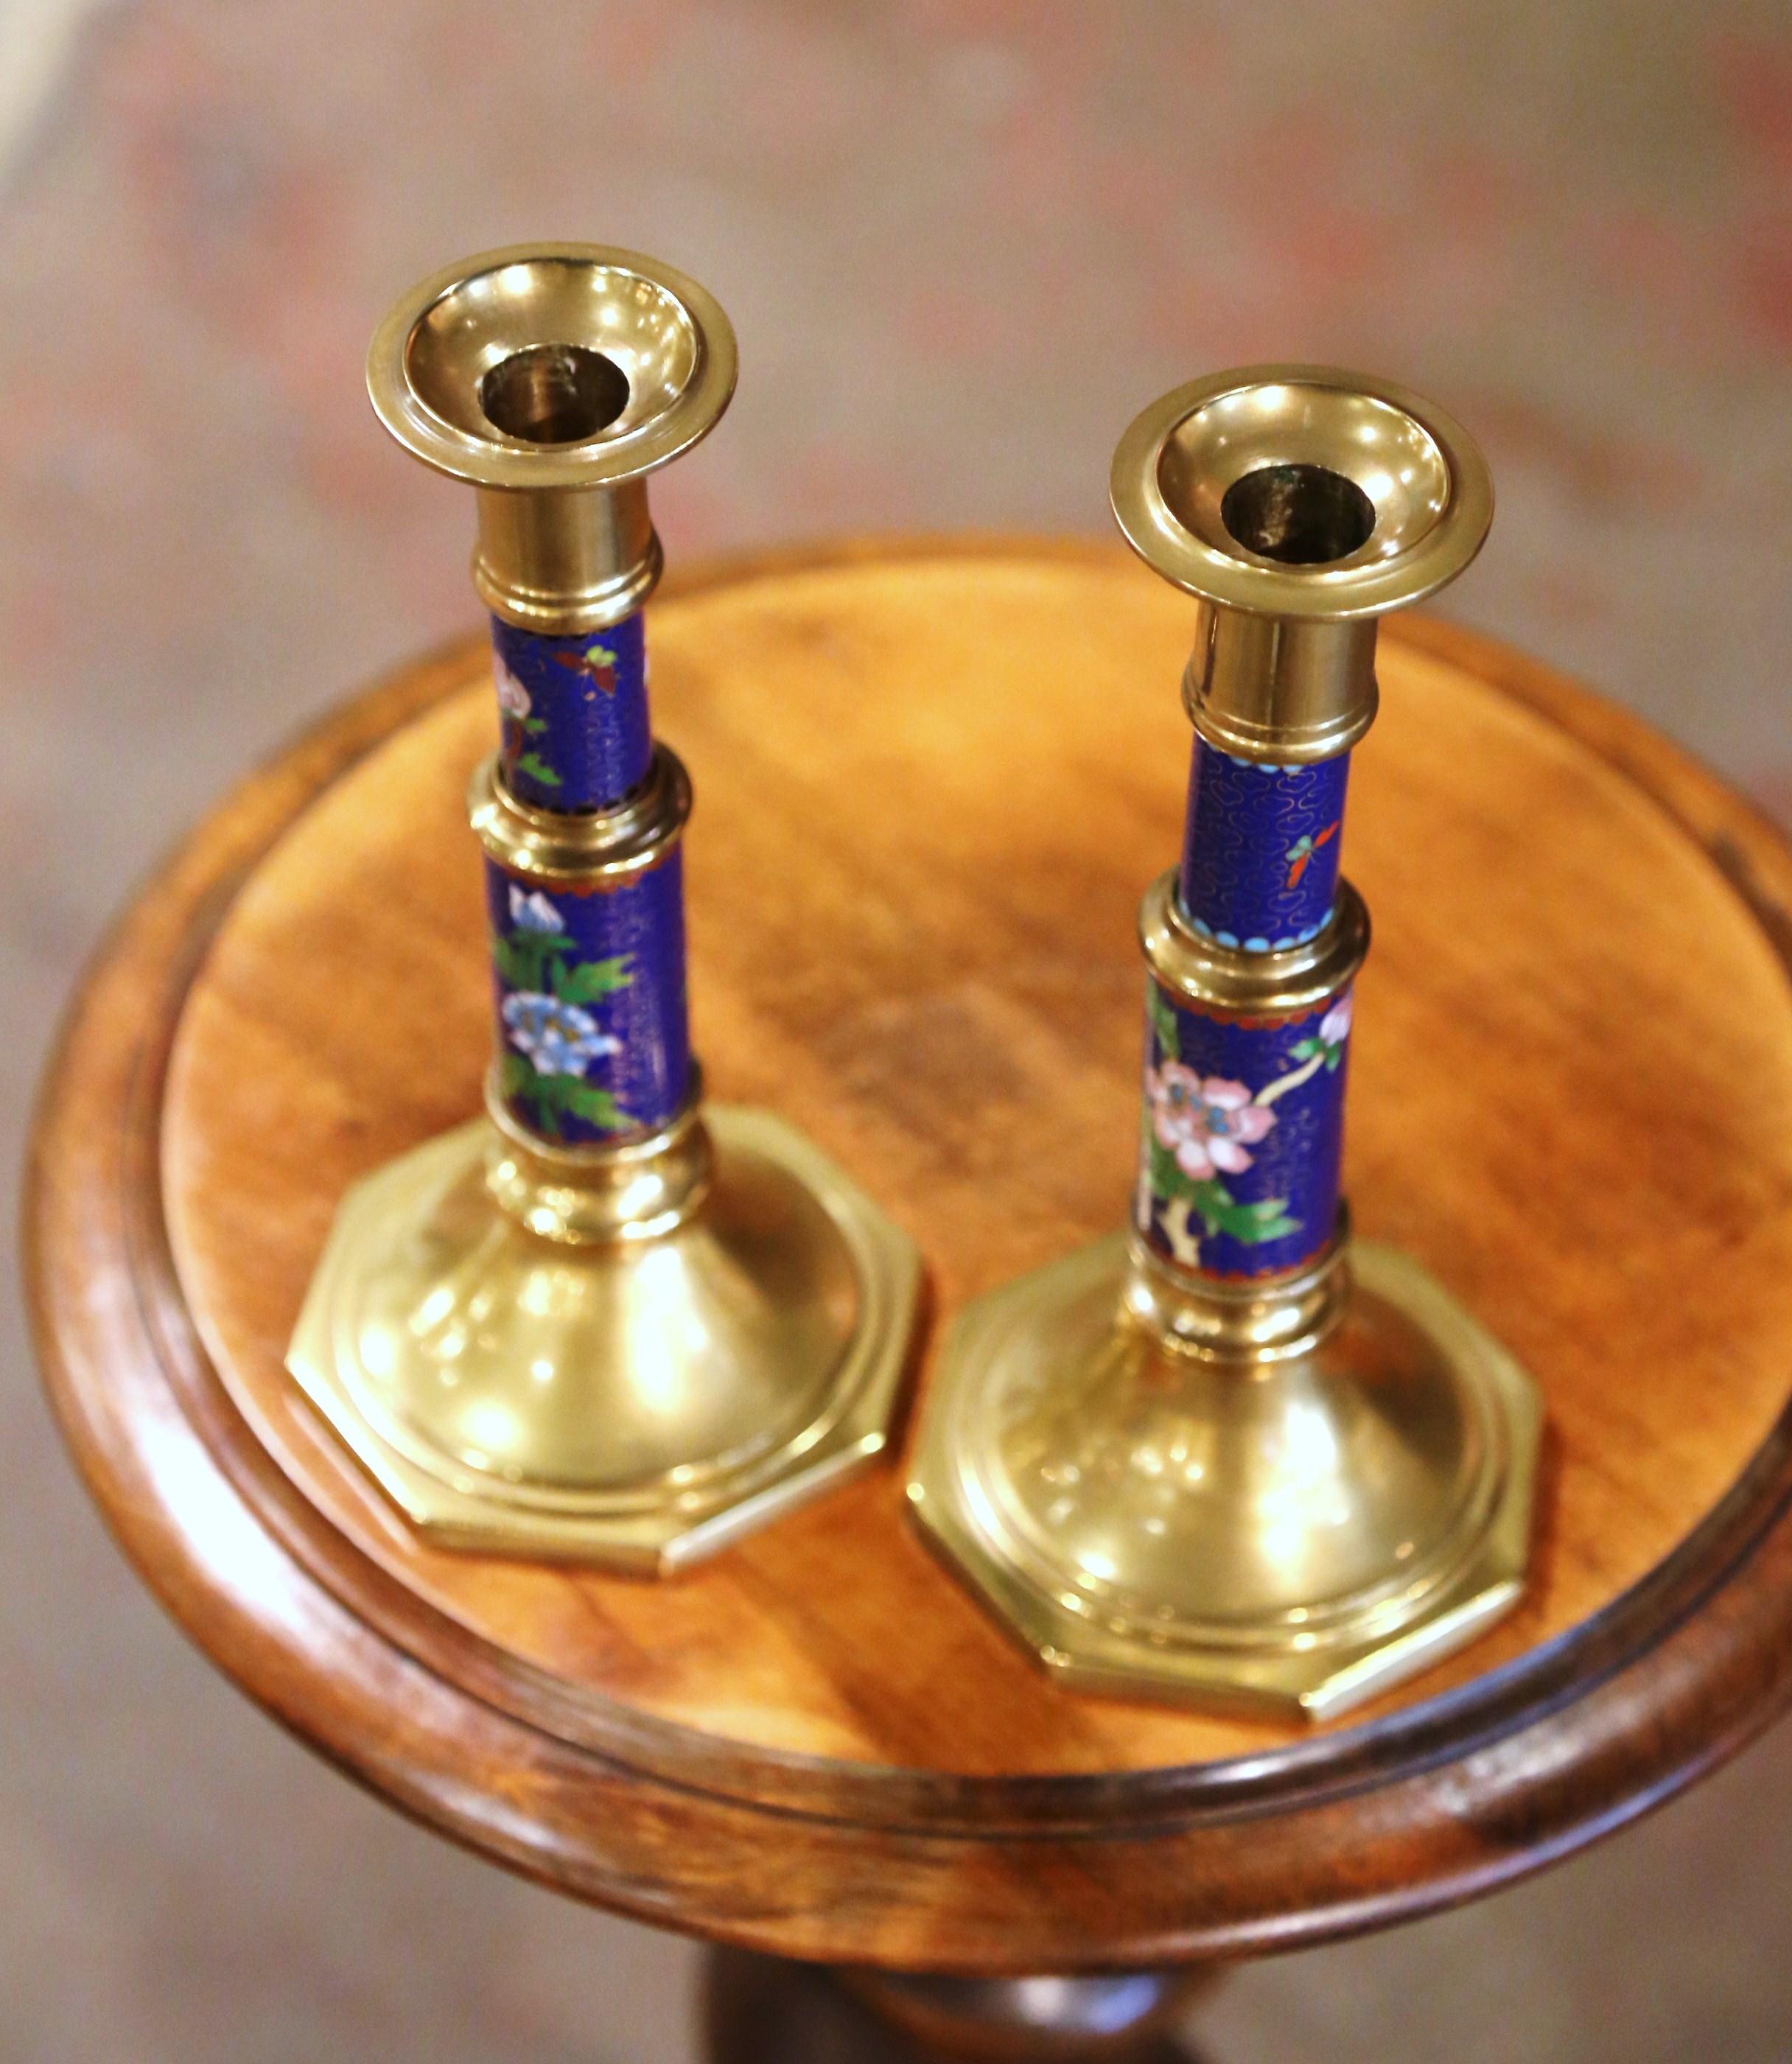 Add timeless elegance to your space with this colorful pair of antique patinated brass candlestick holders. Crafted in China, circa 1970, each candlestick features intricate cloisonné décor with vibrant flower, leaf and bird motifs. Perfect for a